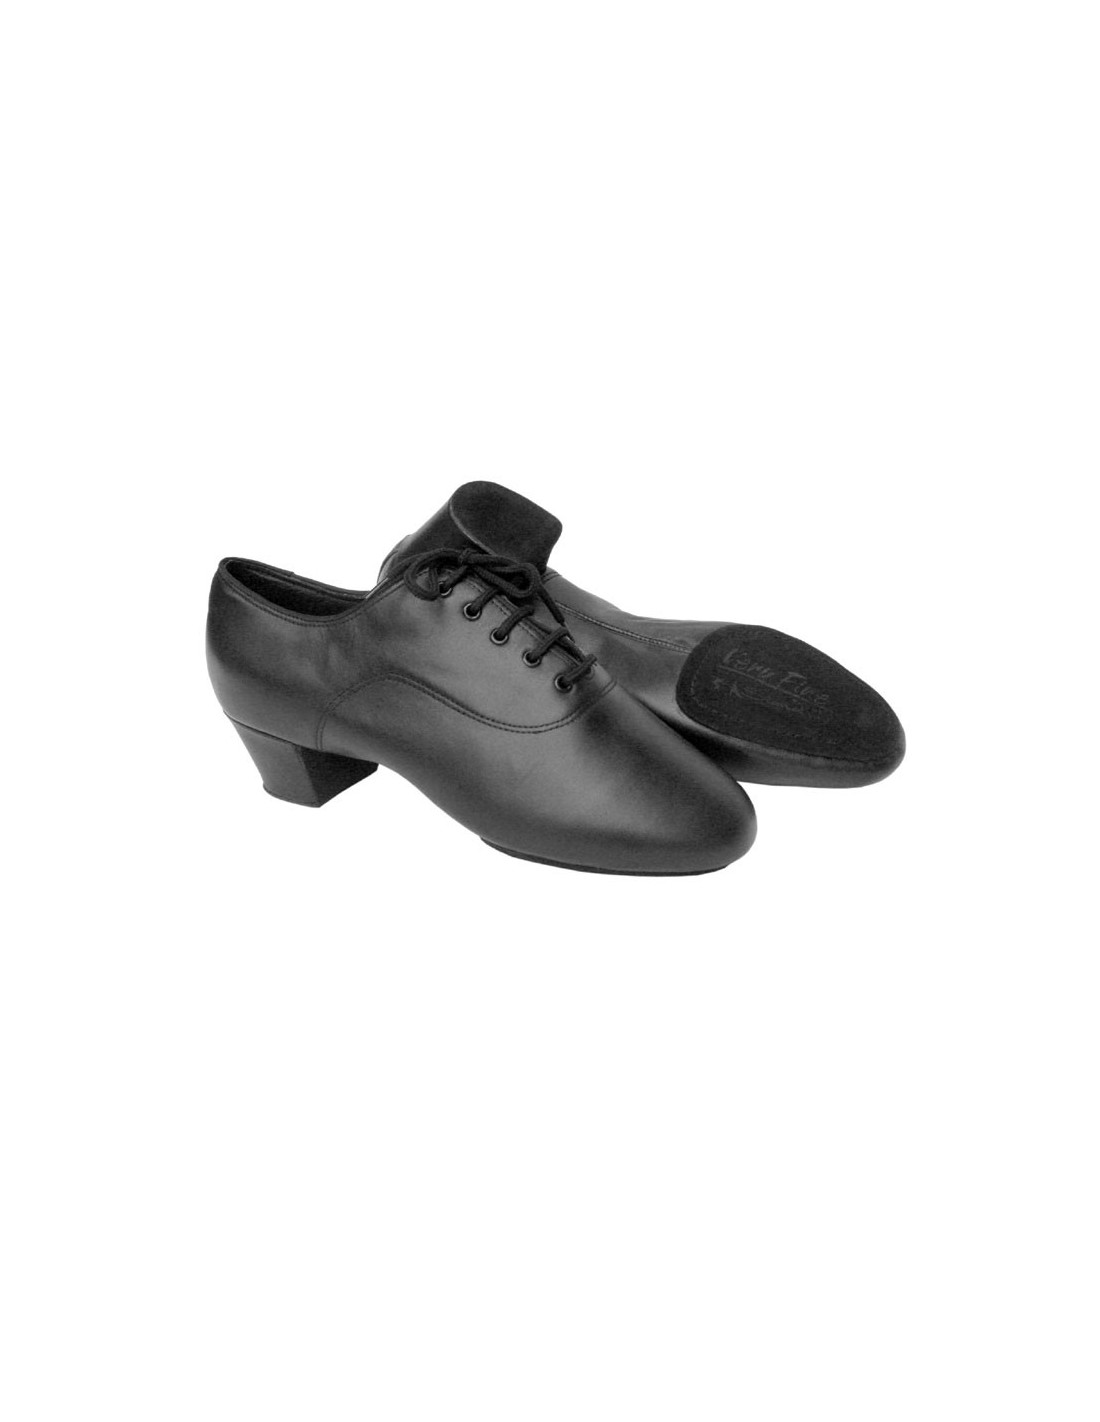 Mens competition dance shoes in black leather with split sole for latin  dance